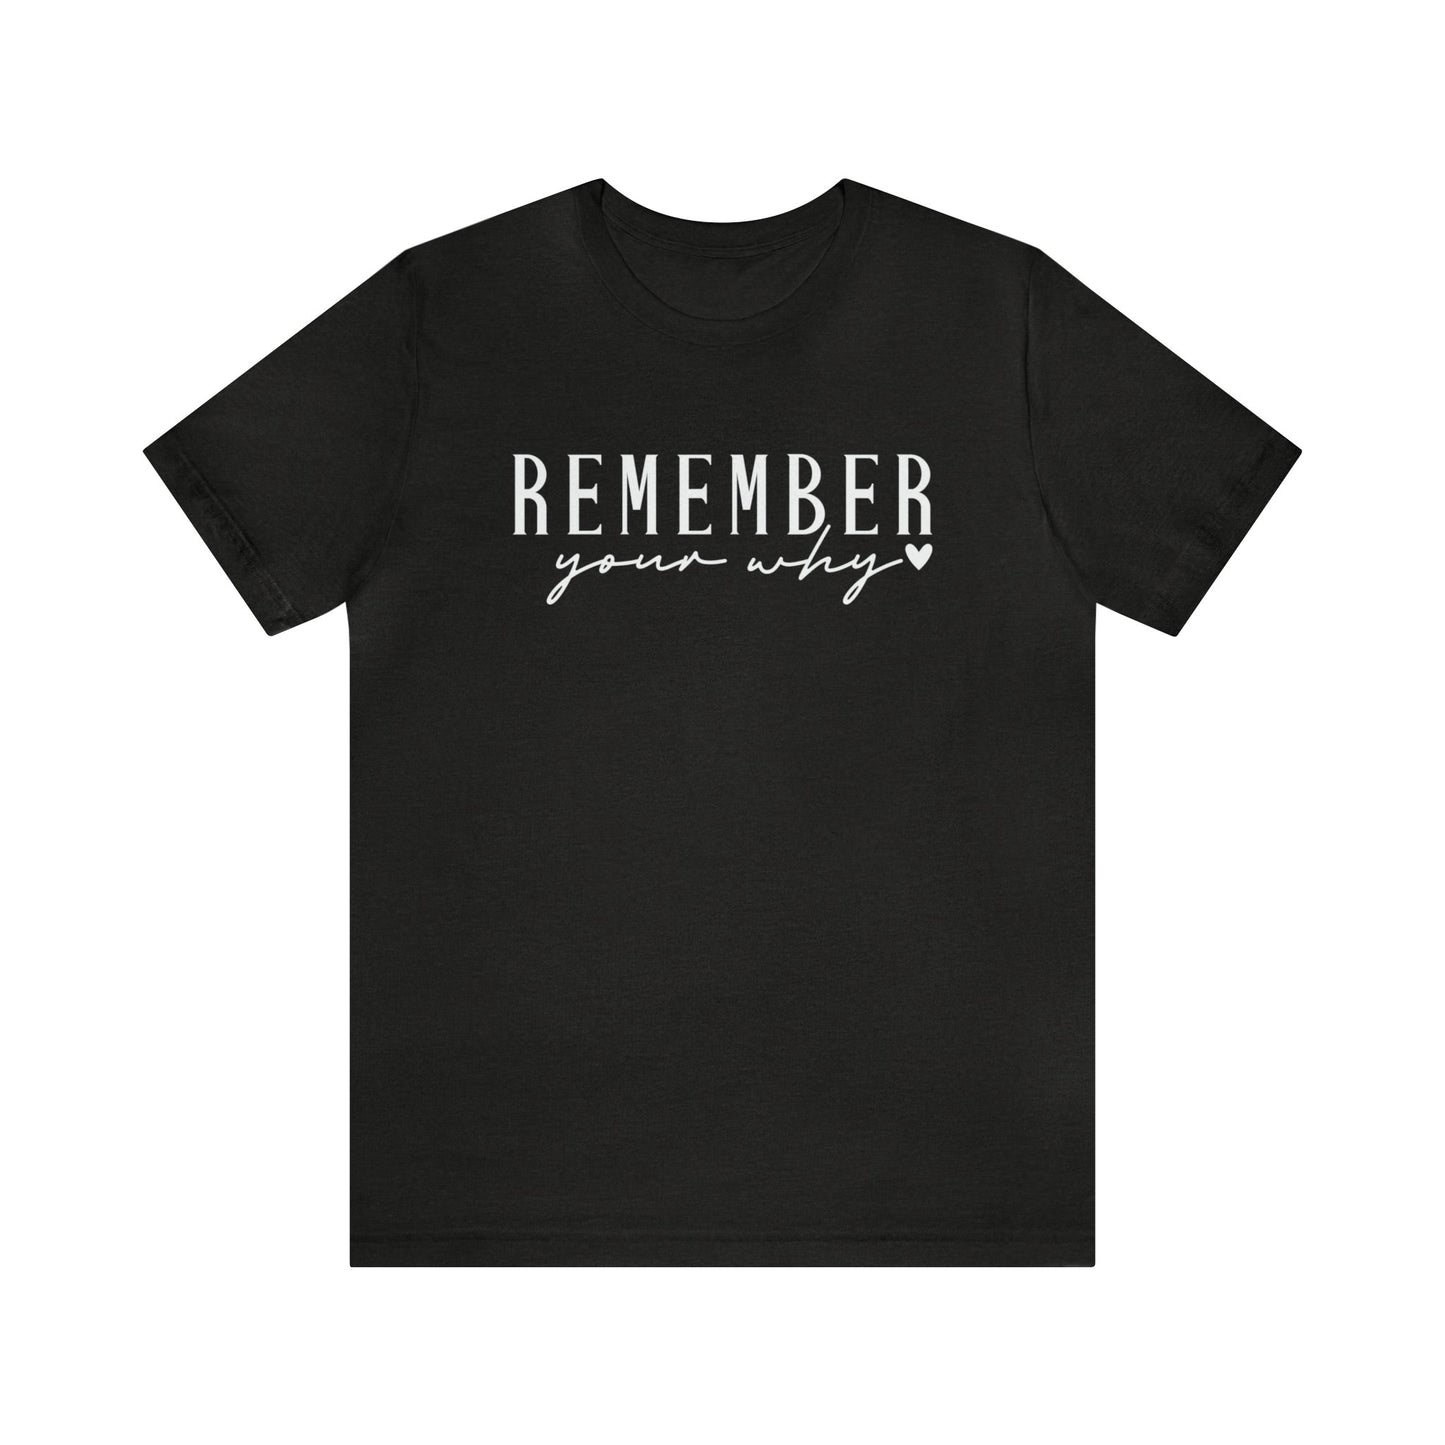 Remember Your Why Women's Tshirt